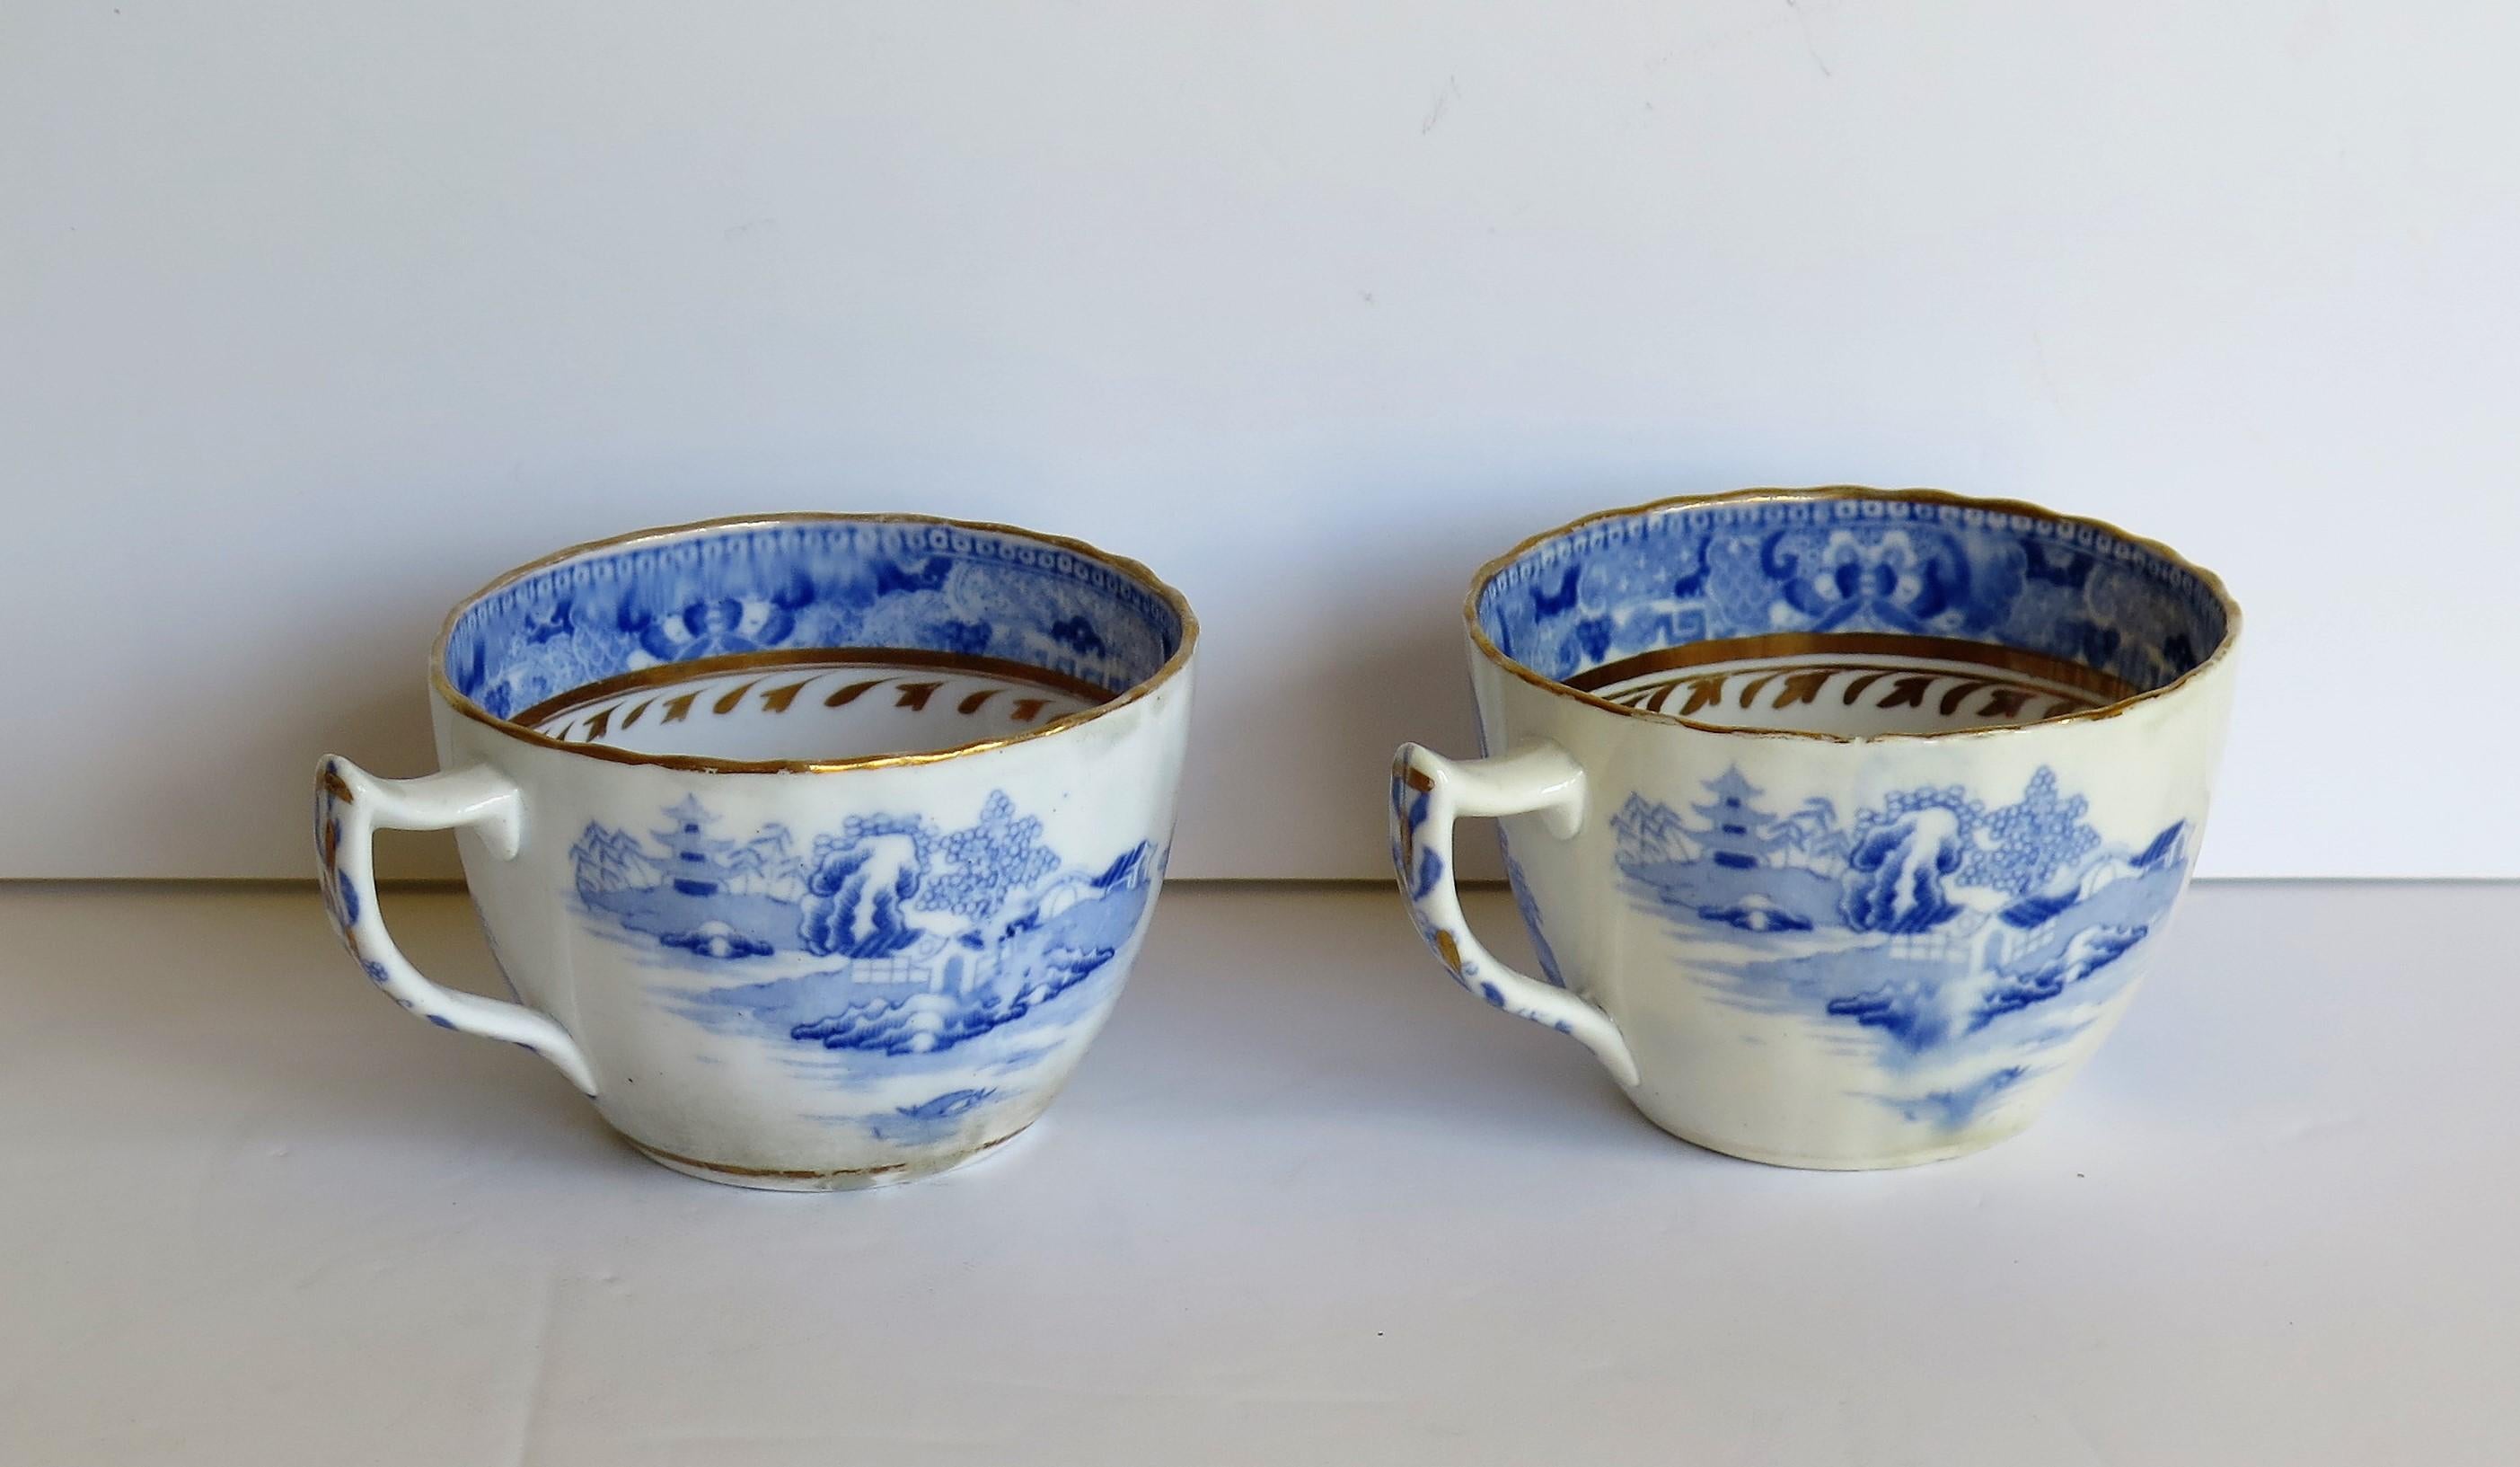 19th Century Miles Mason Porcelain Pair of Tea Cups Broseley Blue and White Pattern, Ca 1805